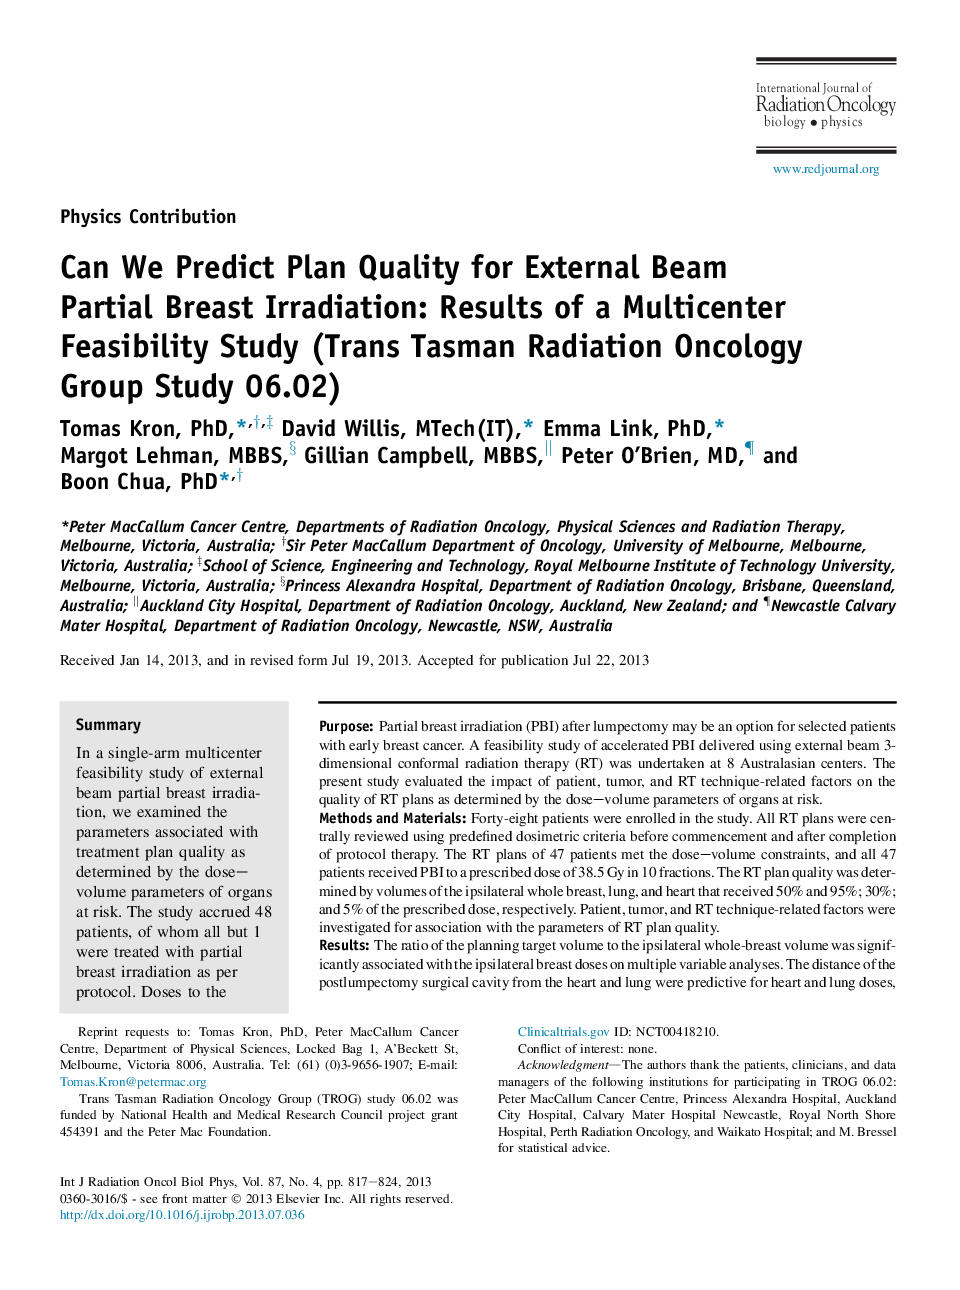 Can We Predict Plan Quality for External Beam Partial Breast Irradiation: Results of a Multicenter Feasibility Study (Trans Tasman Radiation Oncology Group Study 06.02)